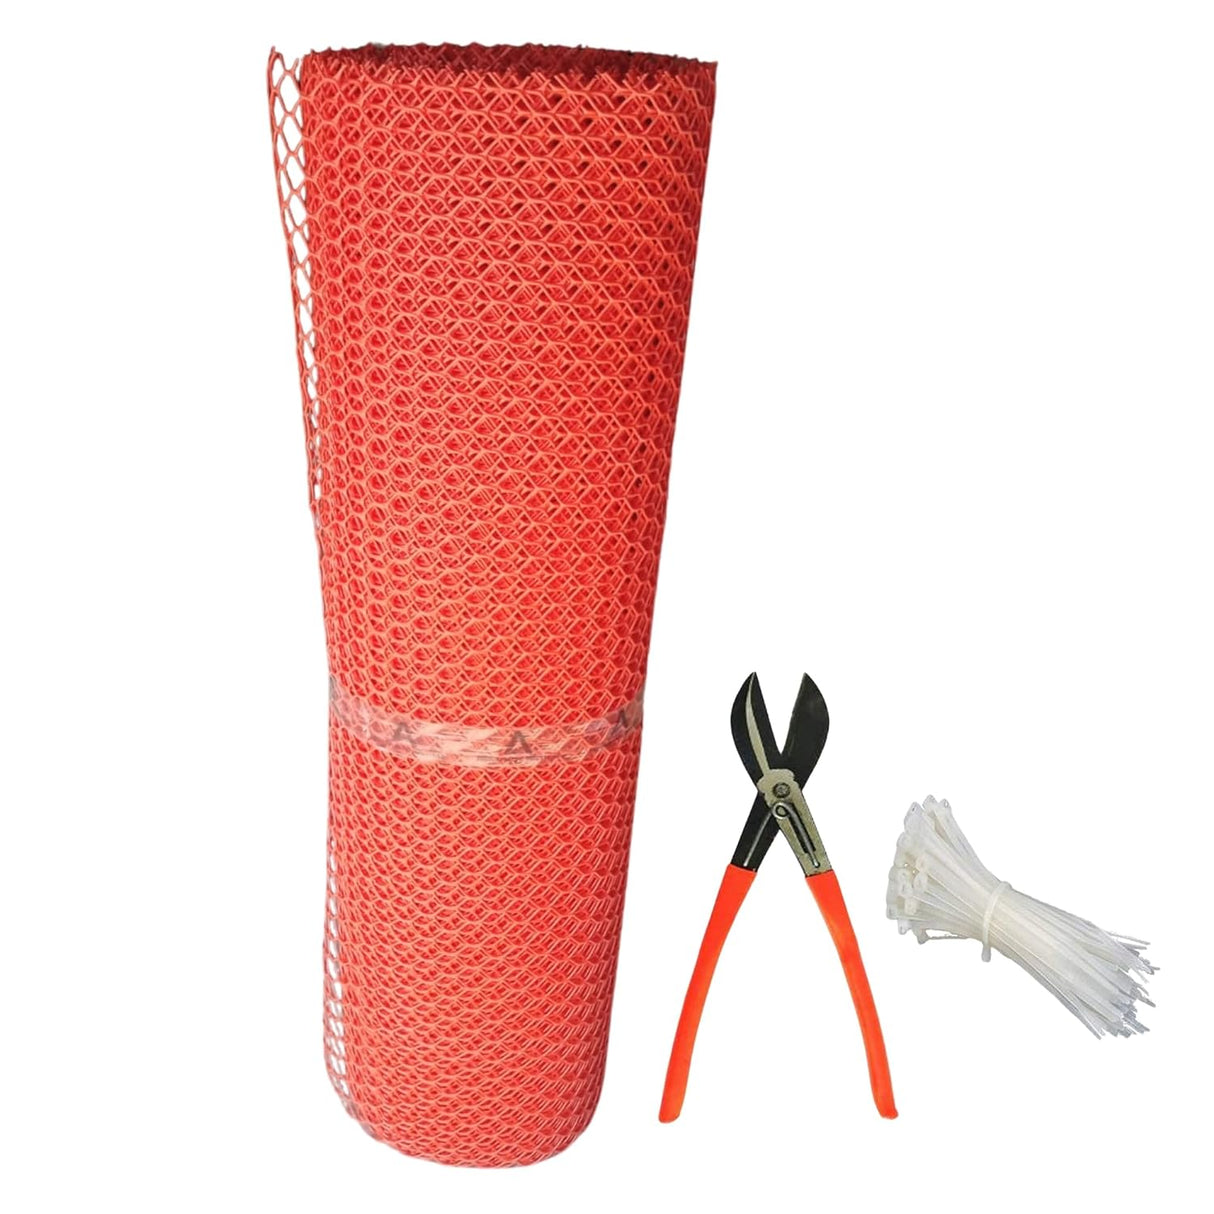 Singhal Tree Guard Net, Garden Fencing Net Virgin Plastic Red Color with 1 Cutter and 50 PVC Tags (4 x 20 Ft)